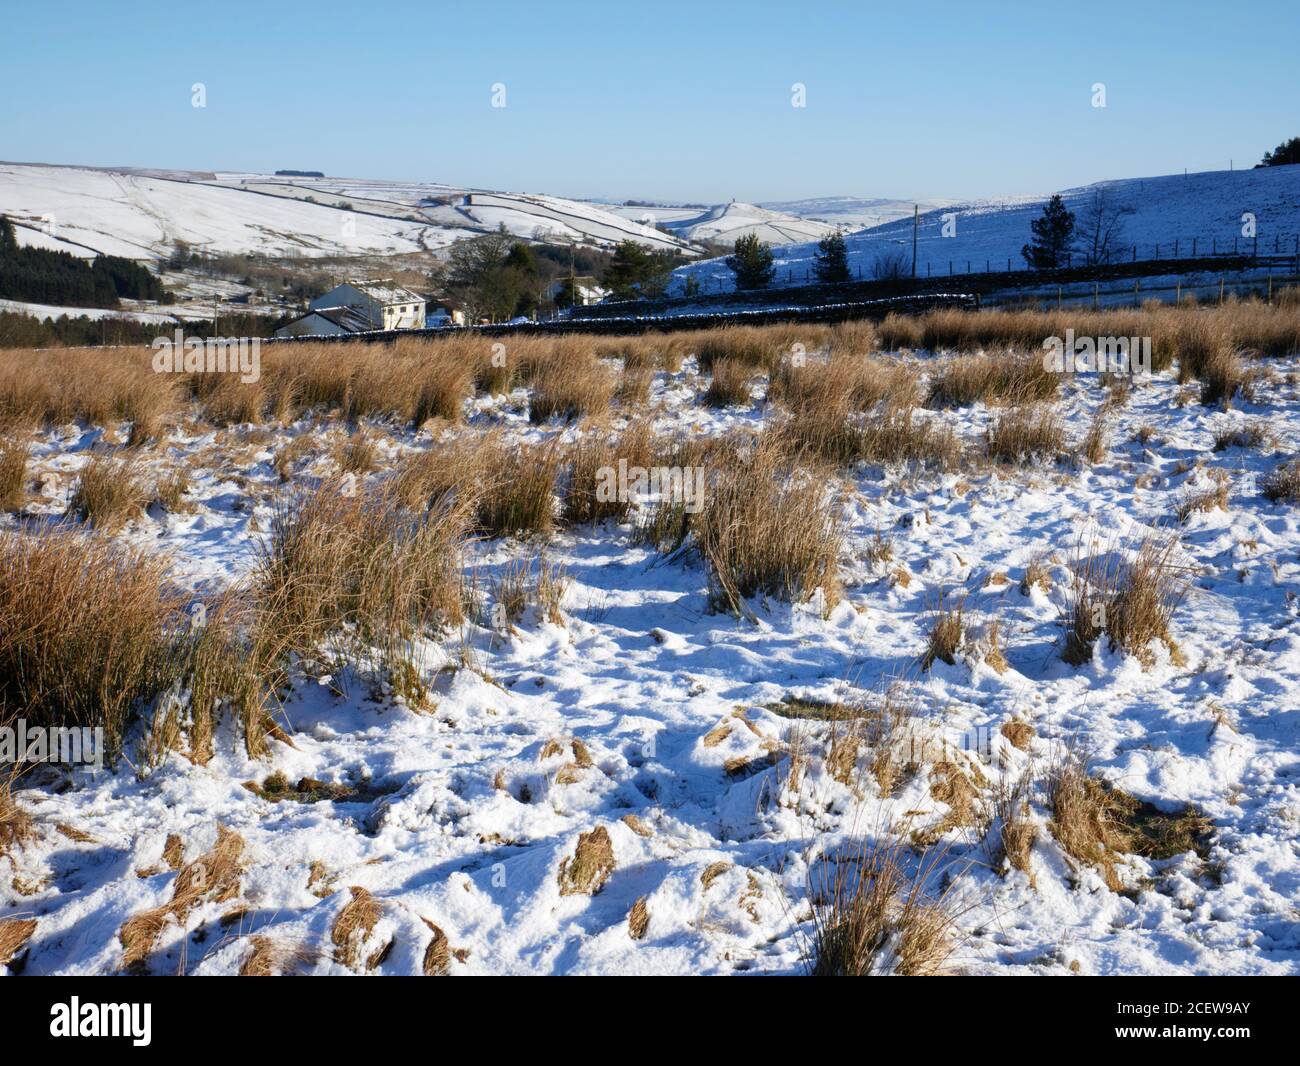 Snow-covered countryside towards Blacko Tower, near Barrowford, Lancashire, seen from the Newchurch to Barley Road.  Winter. Stock Photo